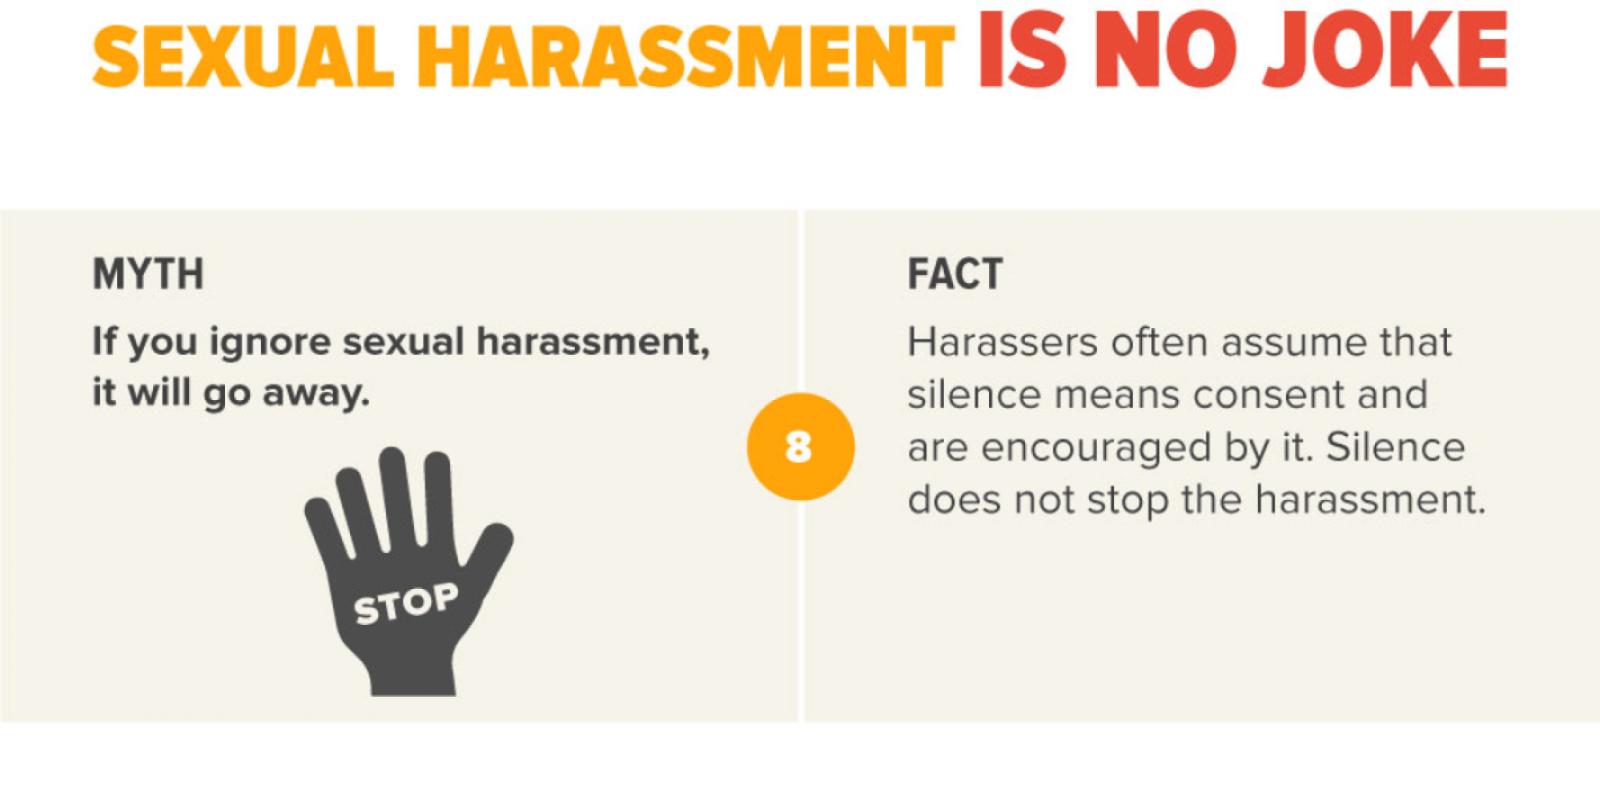 MYTH If you ignore sexual harassment, it will go away.  FACT Harassers often assume that silence means consent and are encouraged by it. Silence does not stop the harassment.